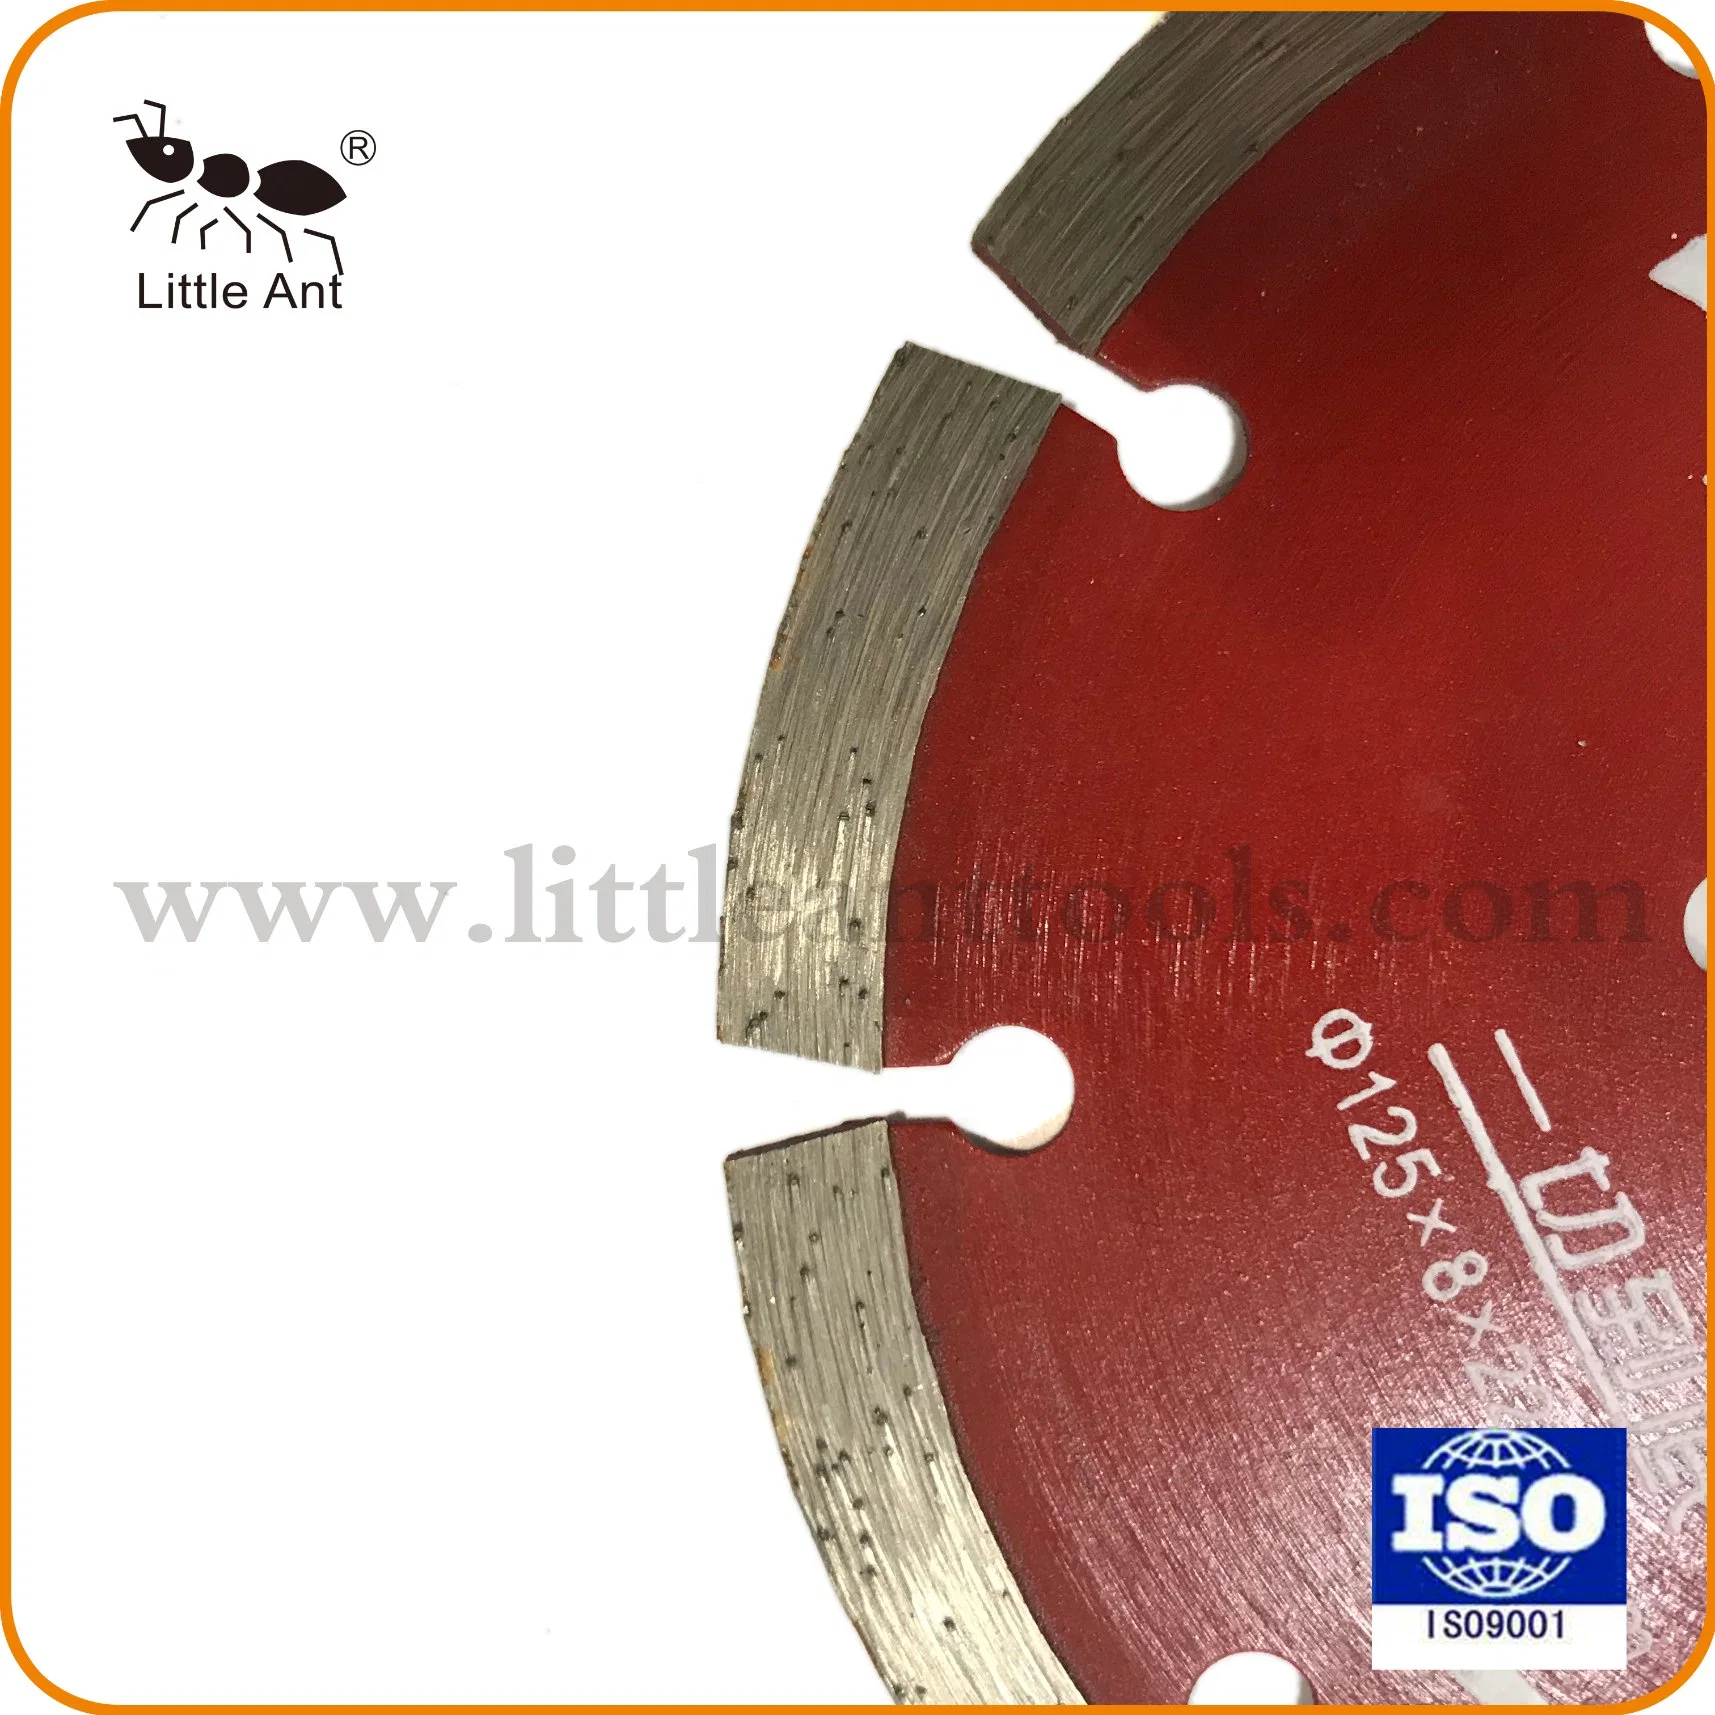 5"/125mm Dry Use Power Tools Cutting Disk Hot-Pressed Diamond Saw Blade